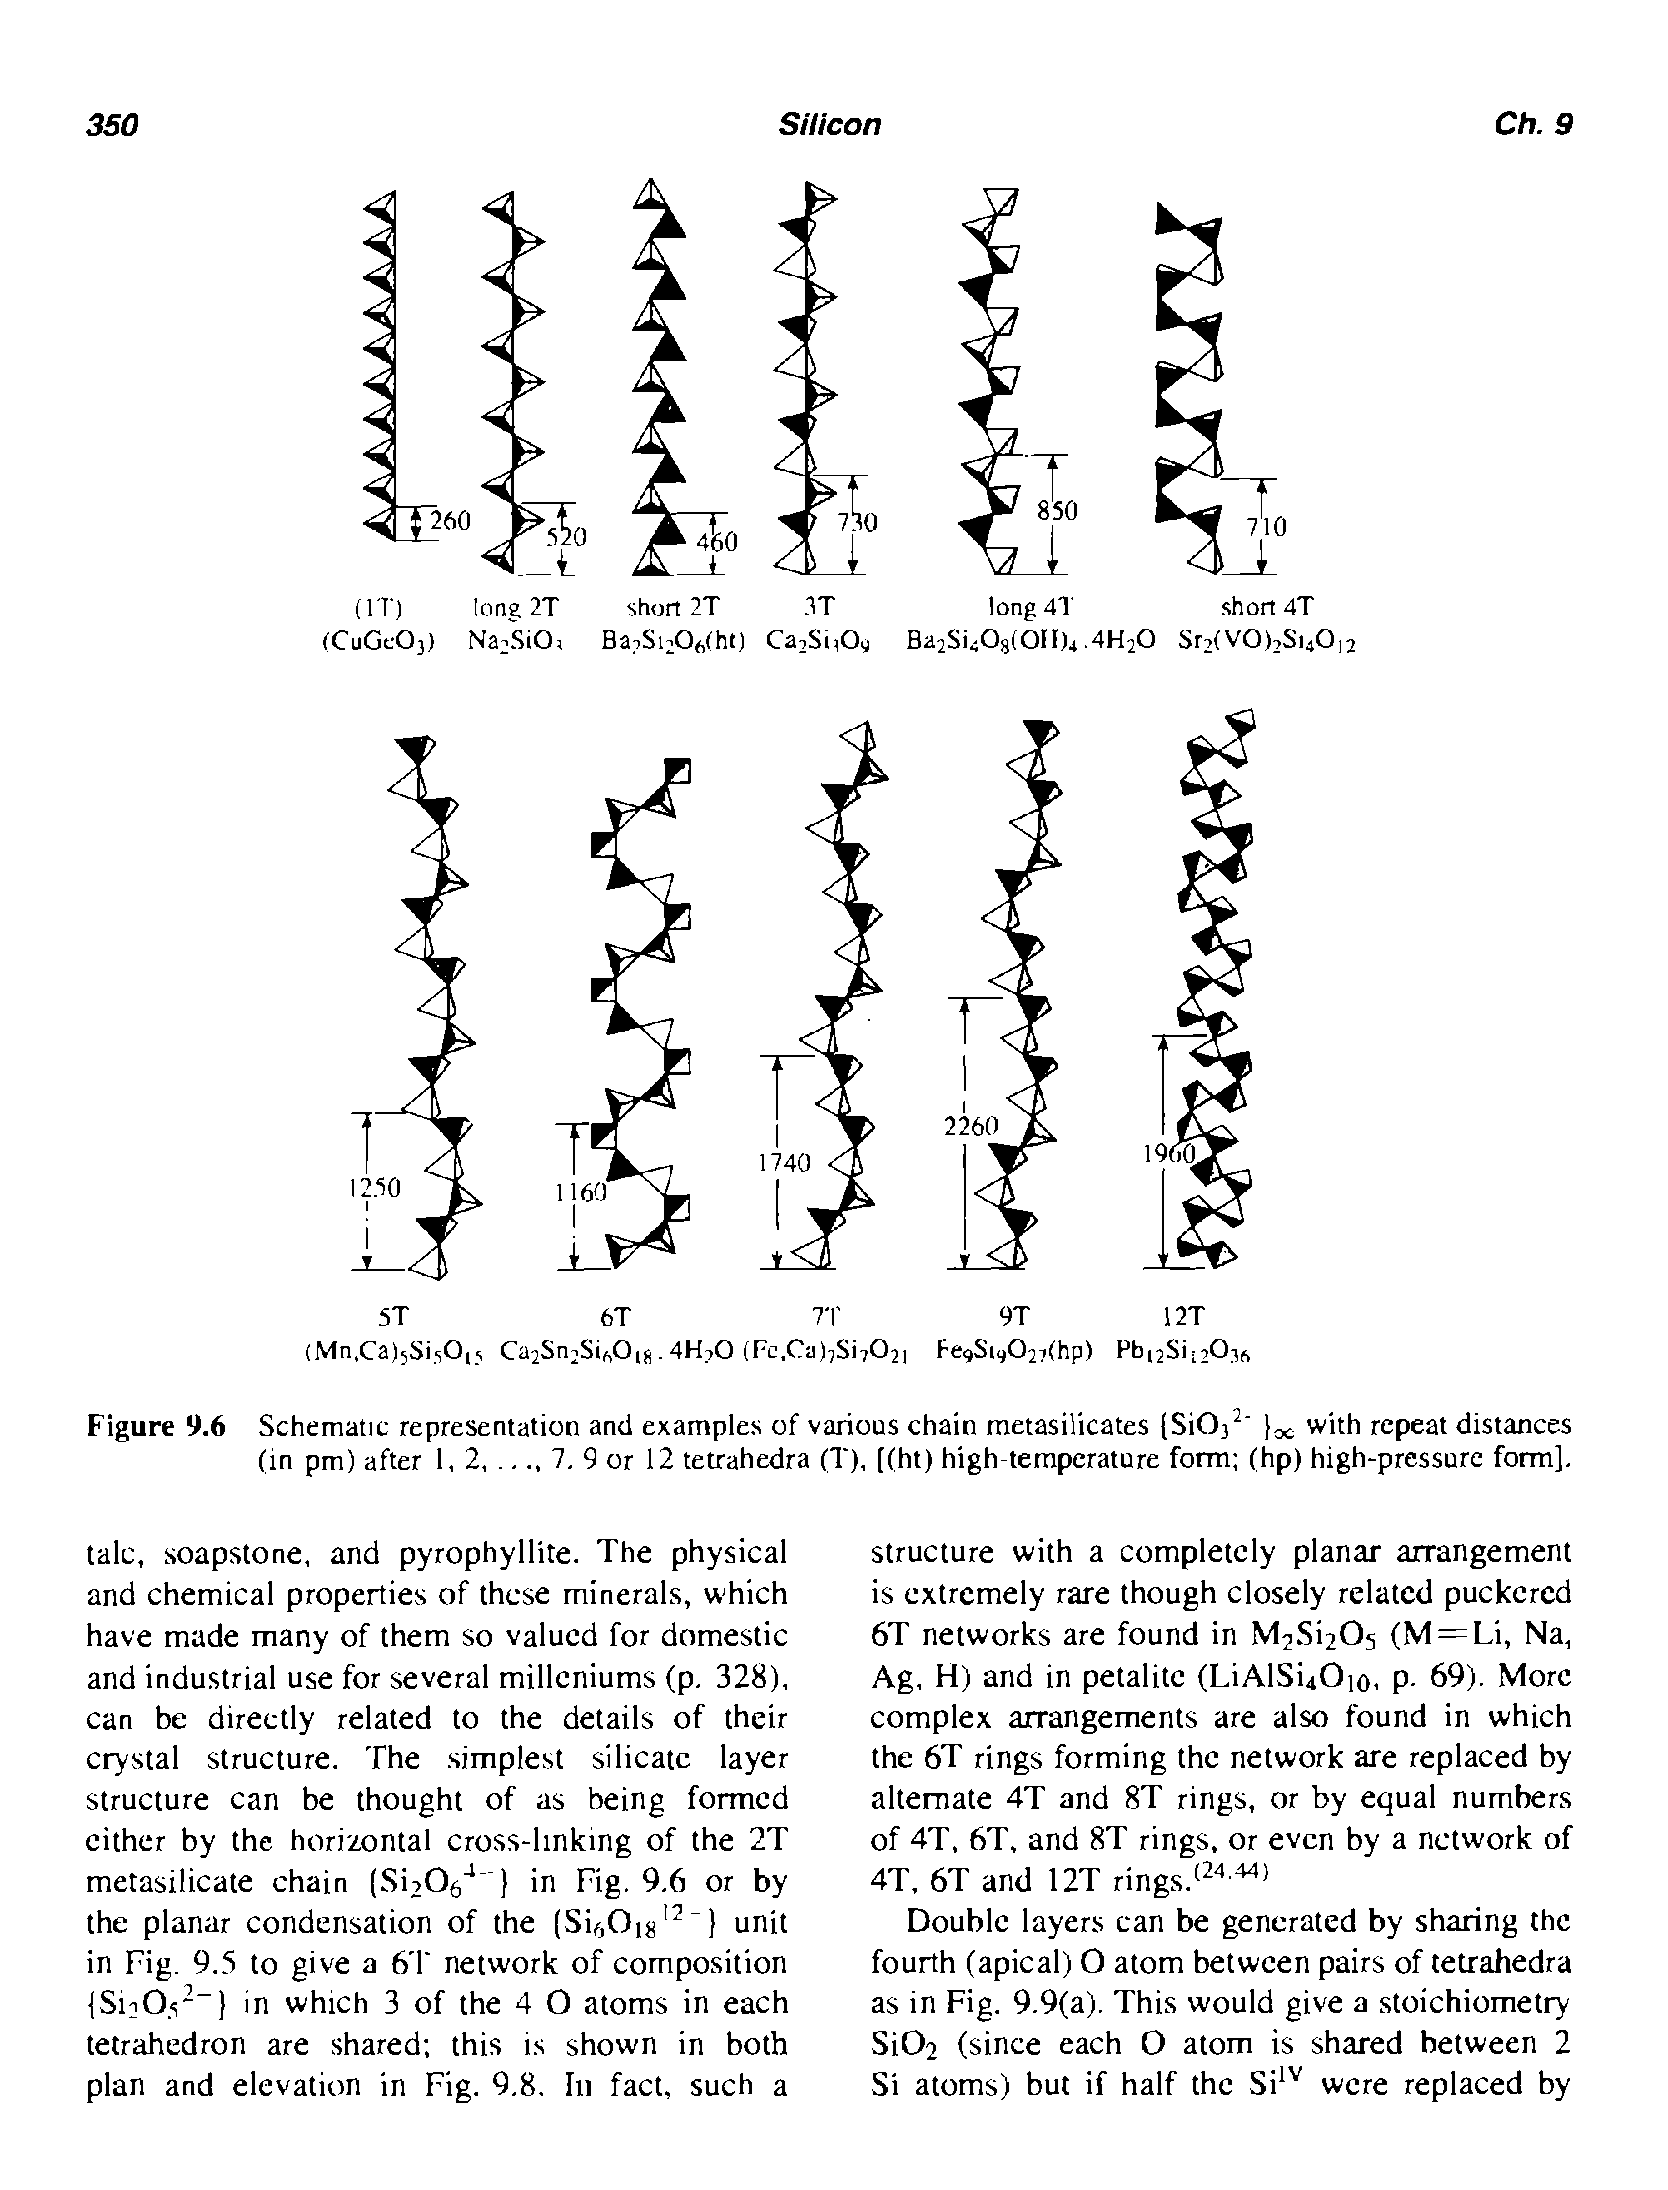 Figure 9.6 Schematic representation and exampies of various chain metasilicates (SiO with repeat distances (in pm) after i, 2,. 7. 9 or 12 tetrahedra (T), ((ht) high-temperature form (hp) high-pressure form].